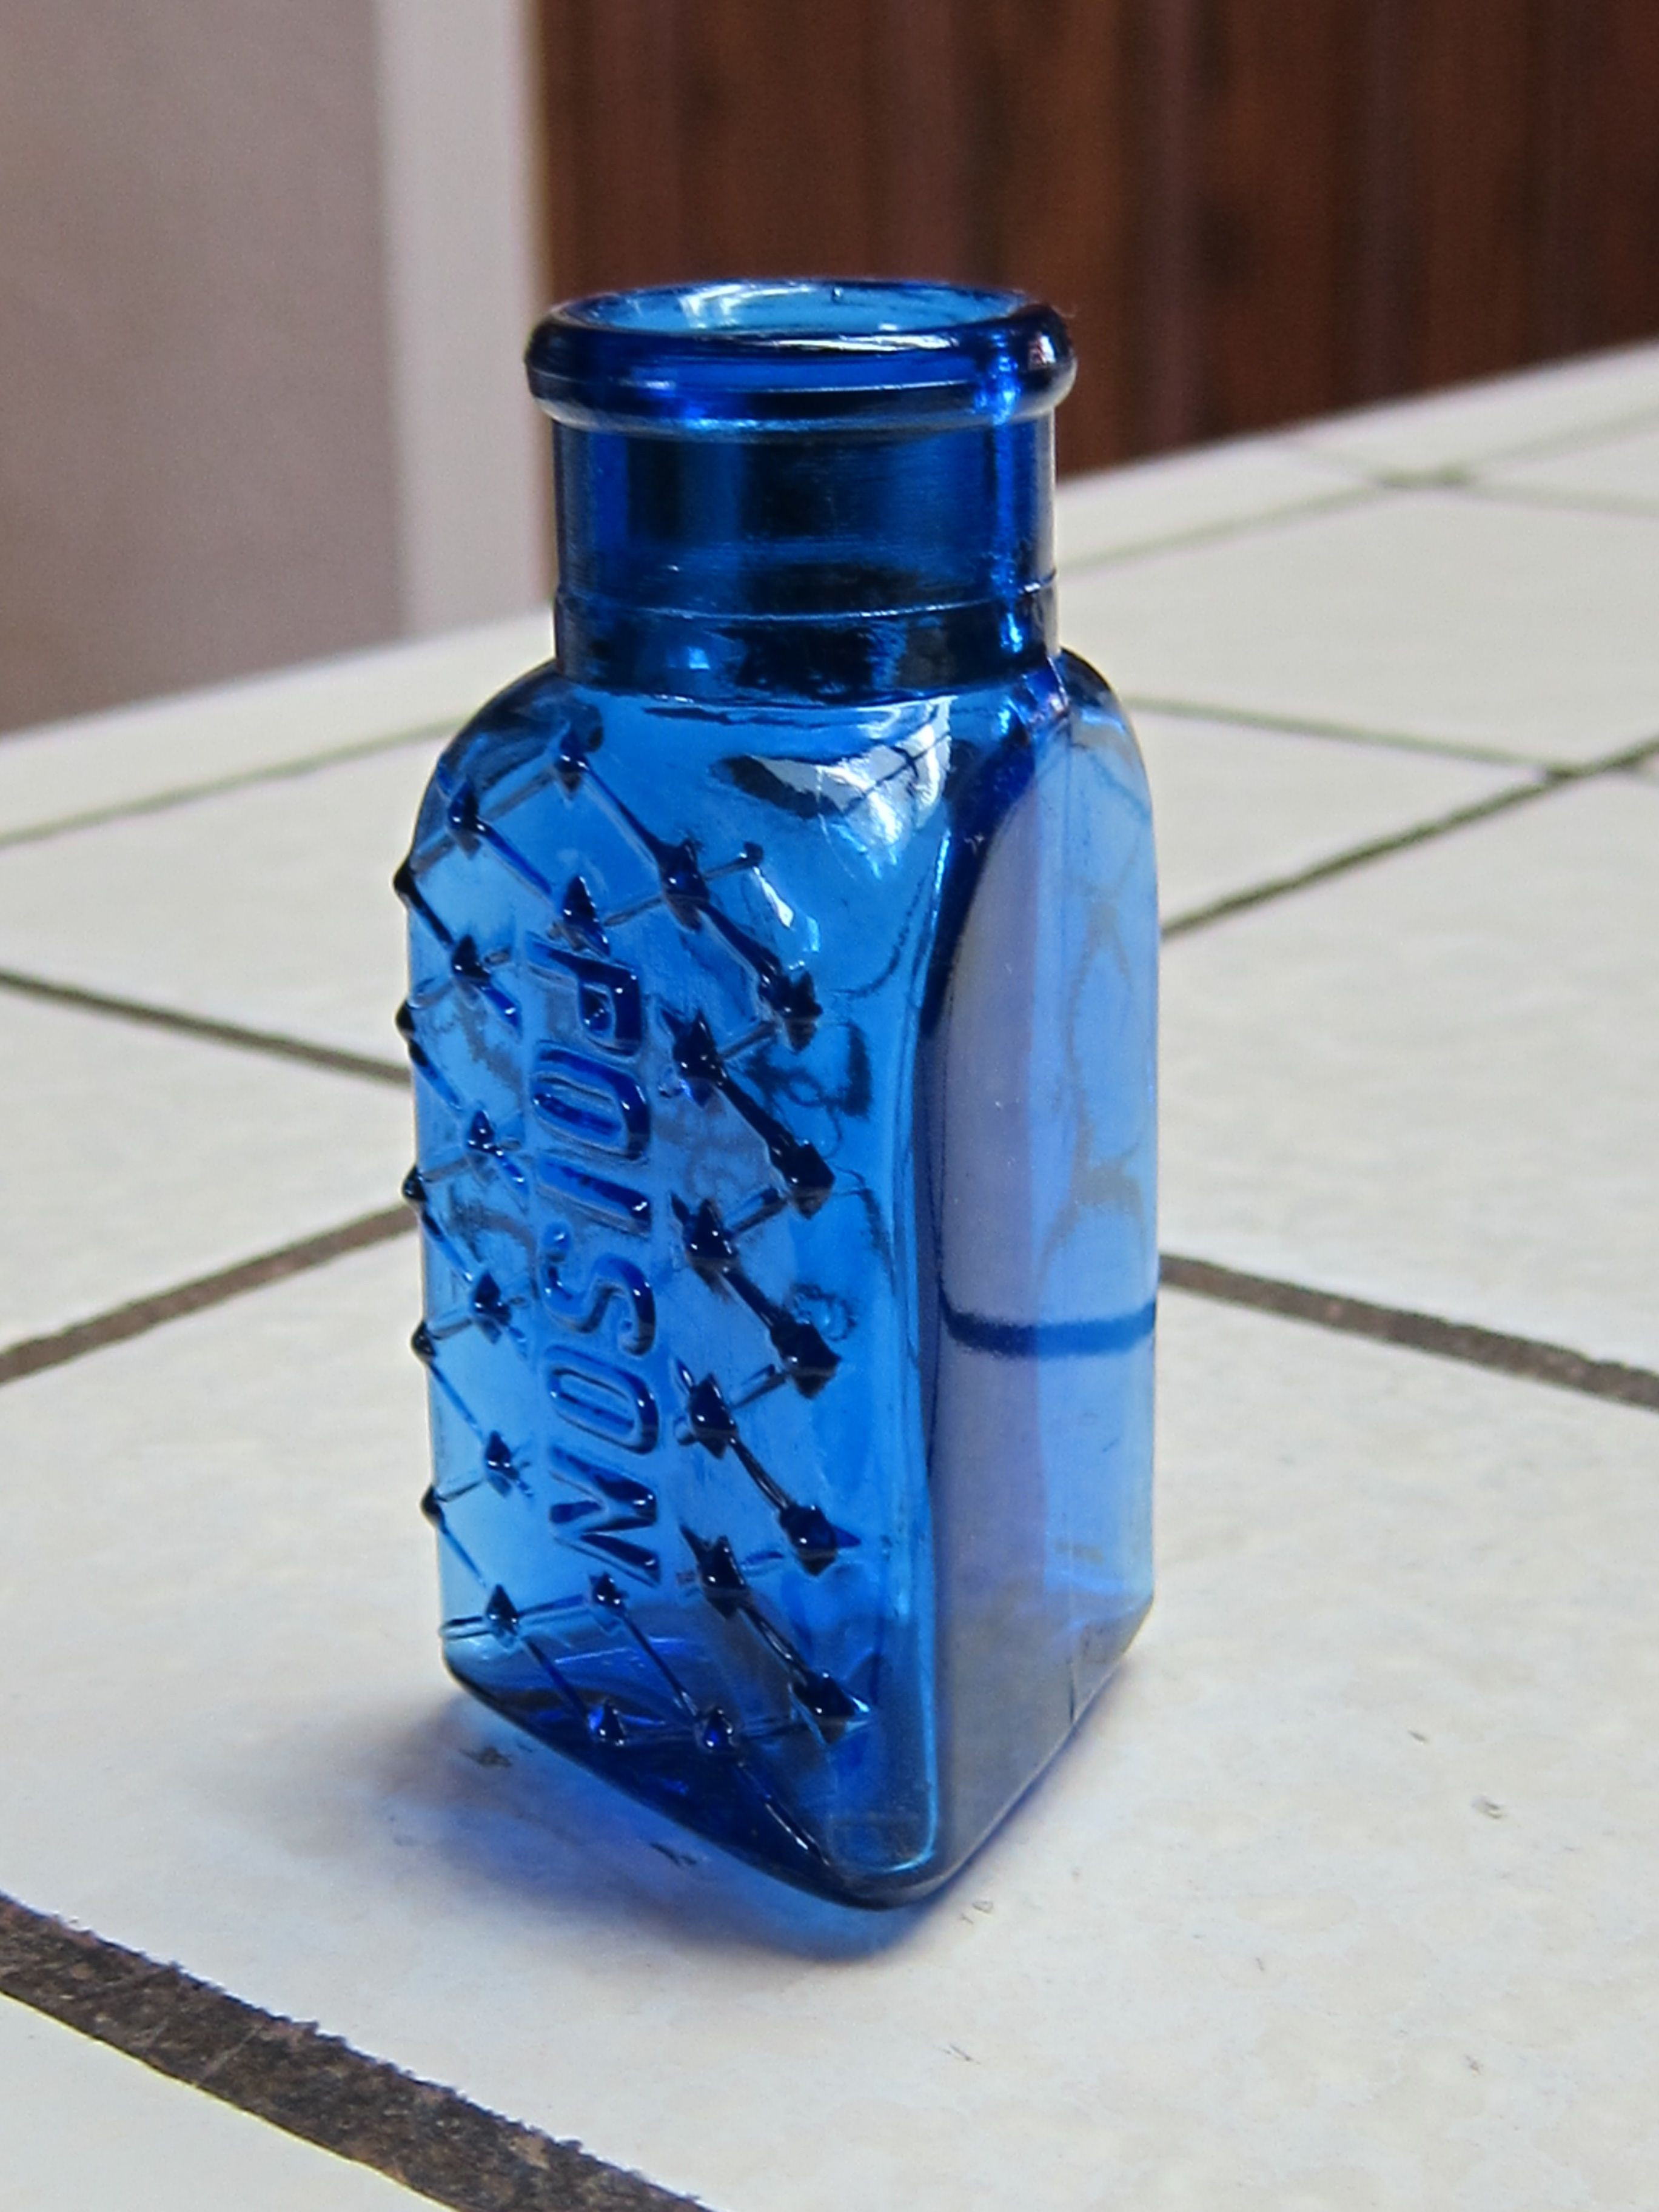 28 Awesome Blue Glass Vases for Sale 2024 free download blue glass vases for sale of colbalt blue poison bottle triangle shaped antiques pinterest within colbalt blue poison bottle triangle shaped